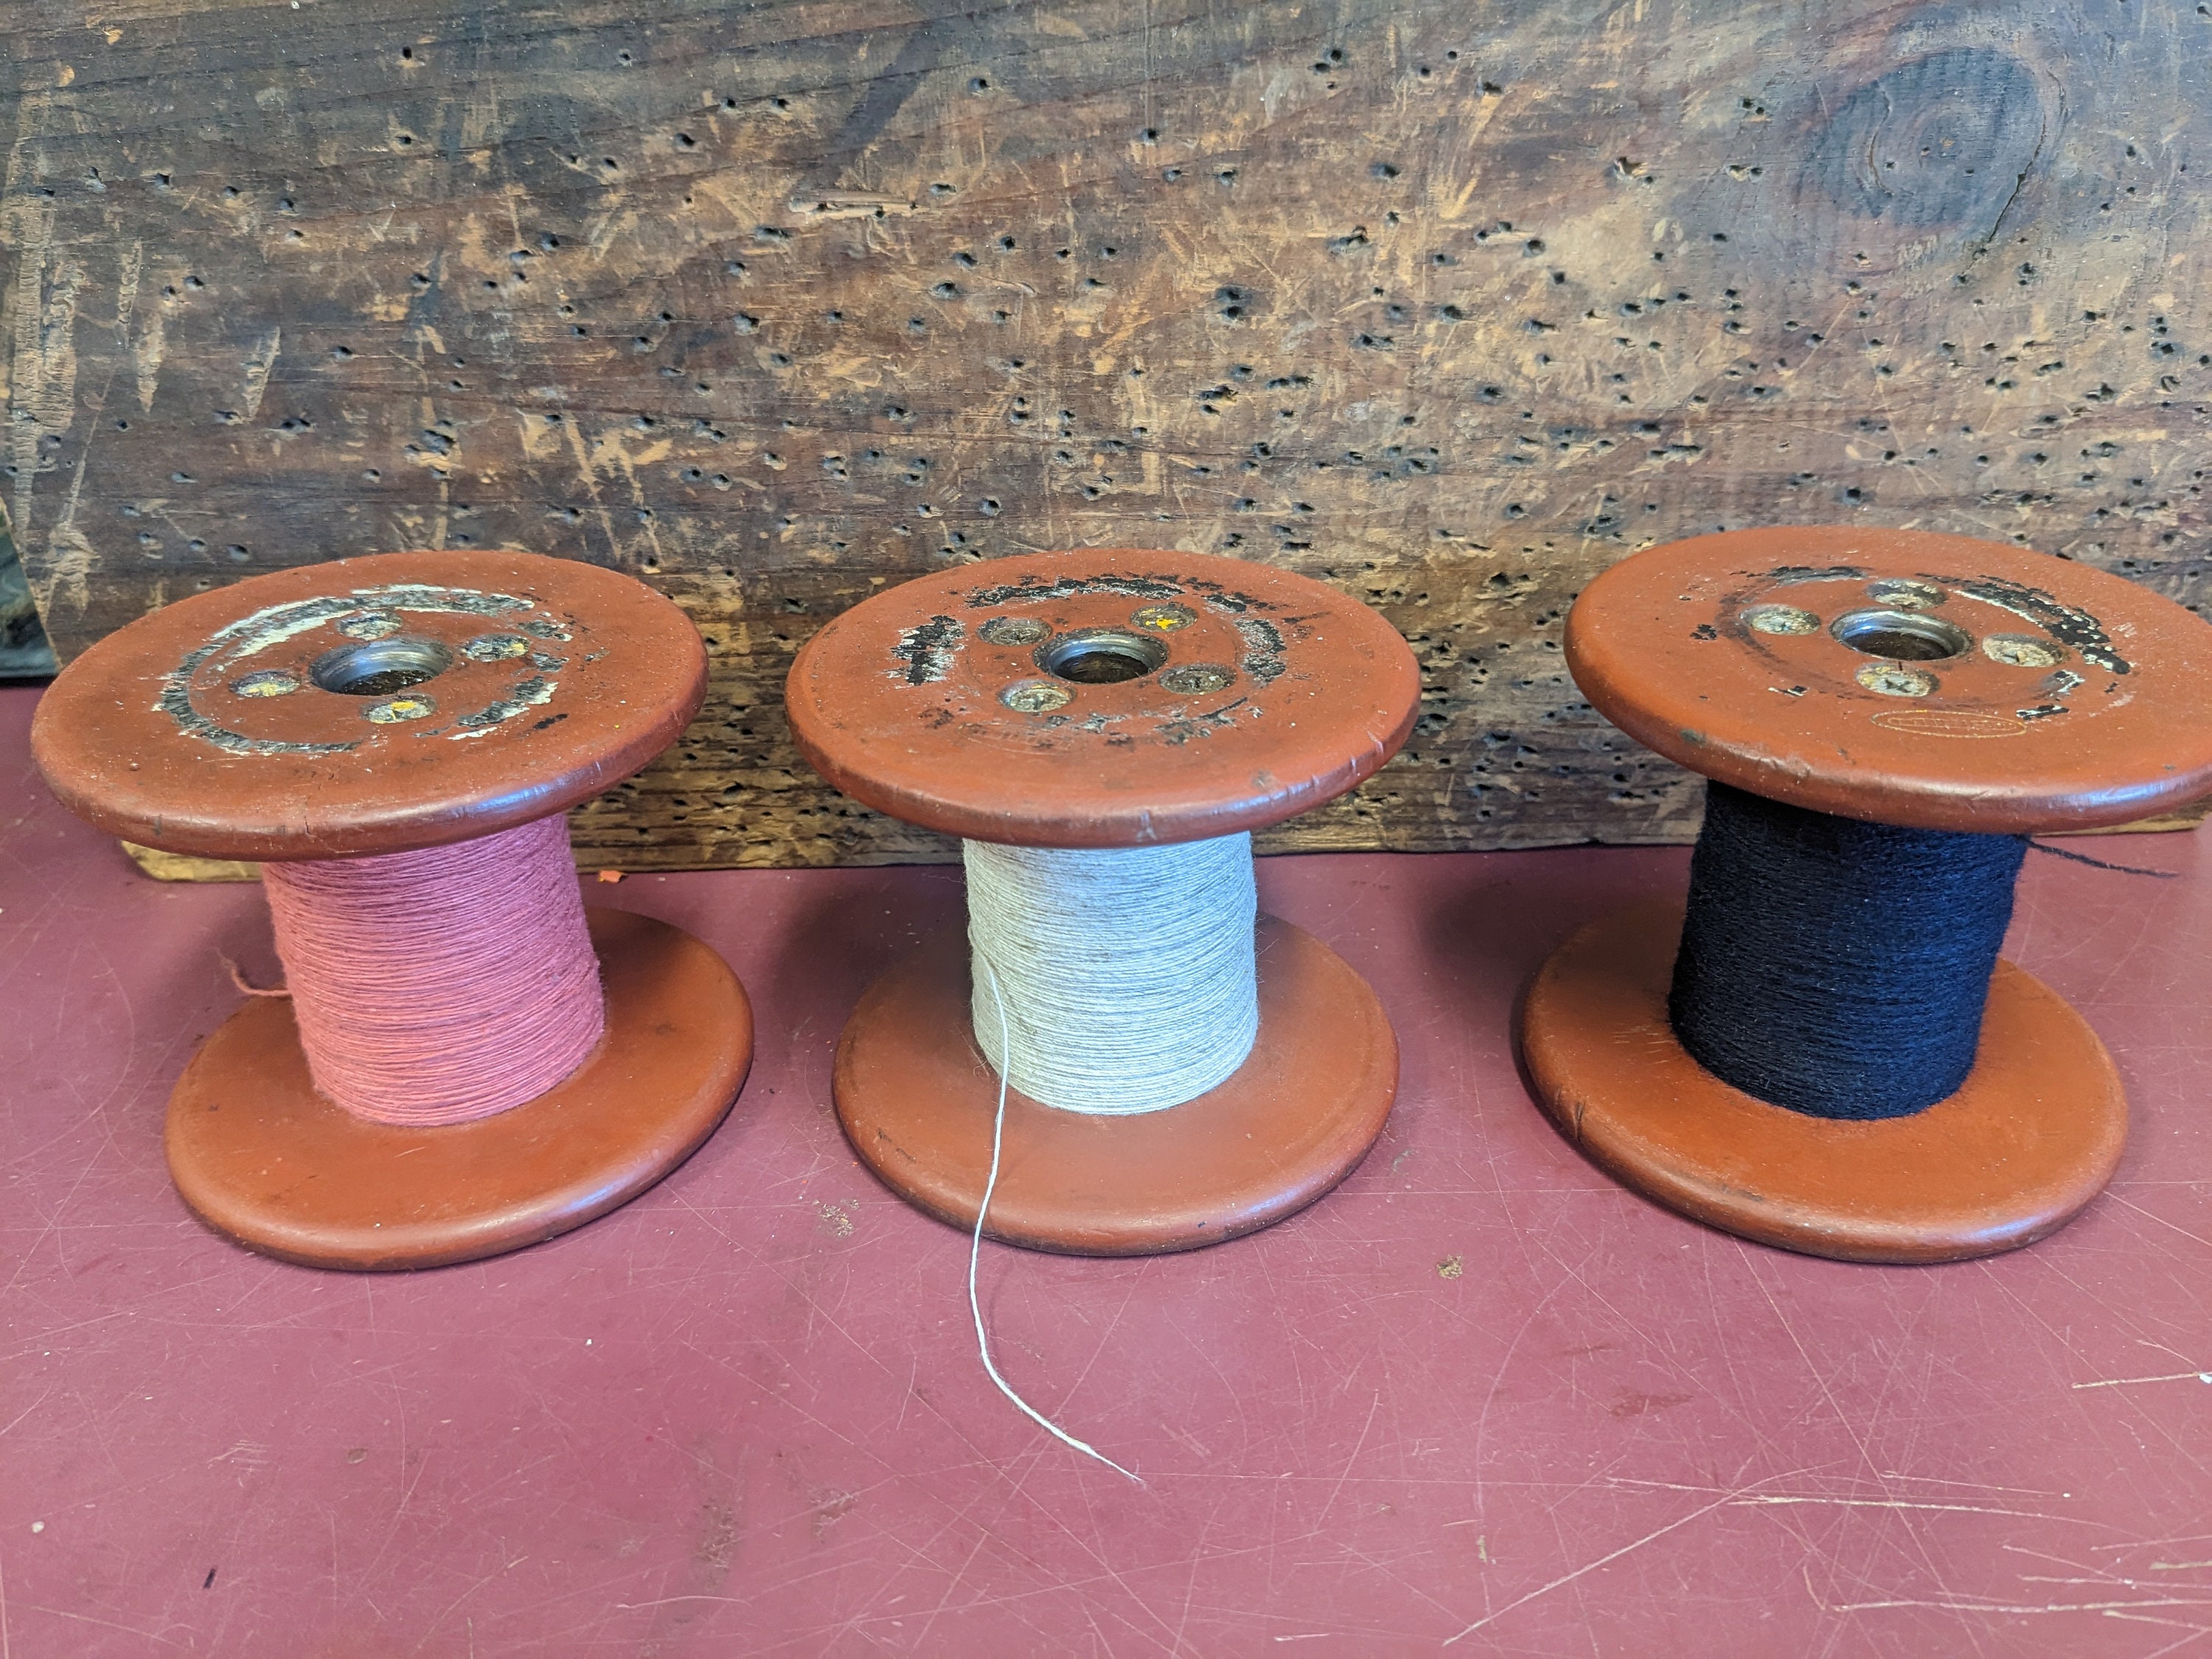 100 Wooden Spools 1 1/8 x 7/8 inch , Wood Bobbin for Crafting, Twine,  Thread, Sewing or Decor